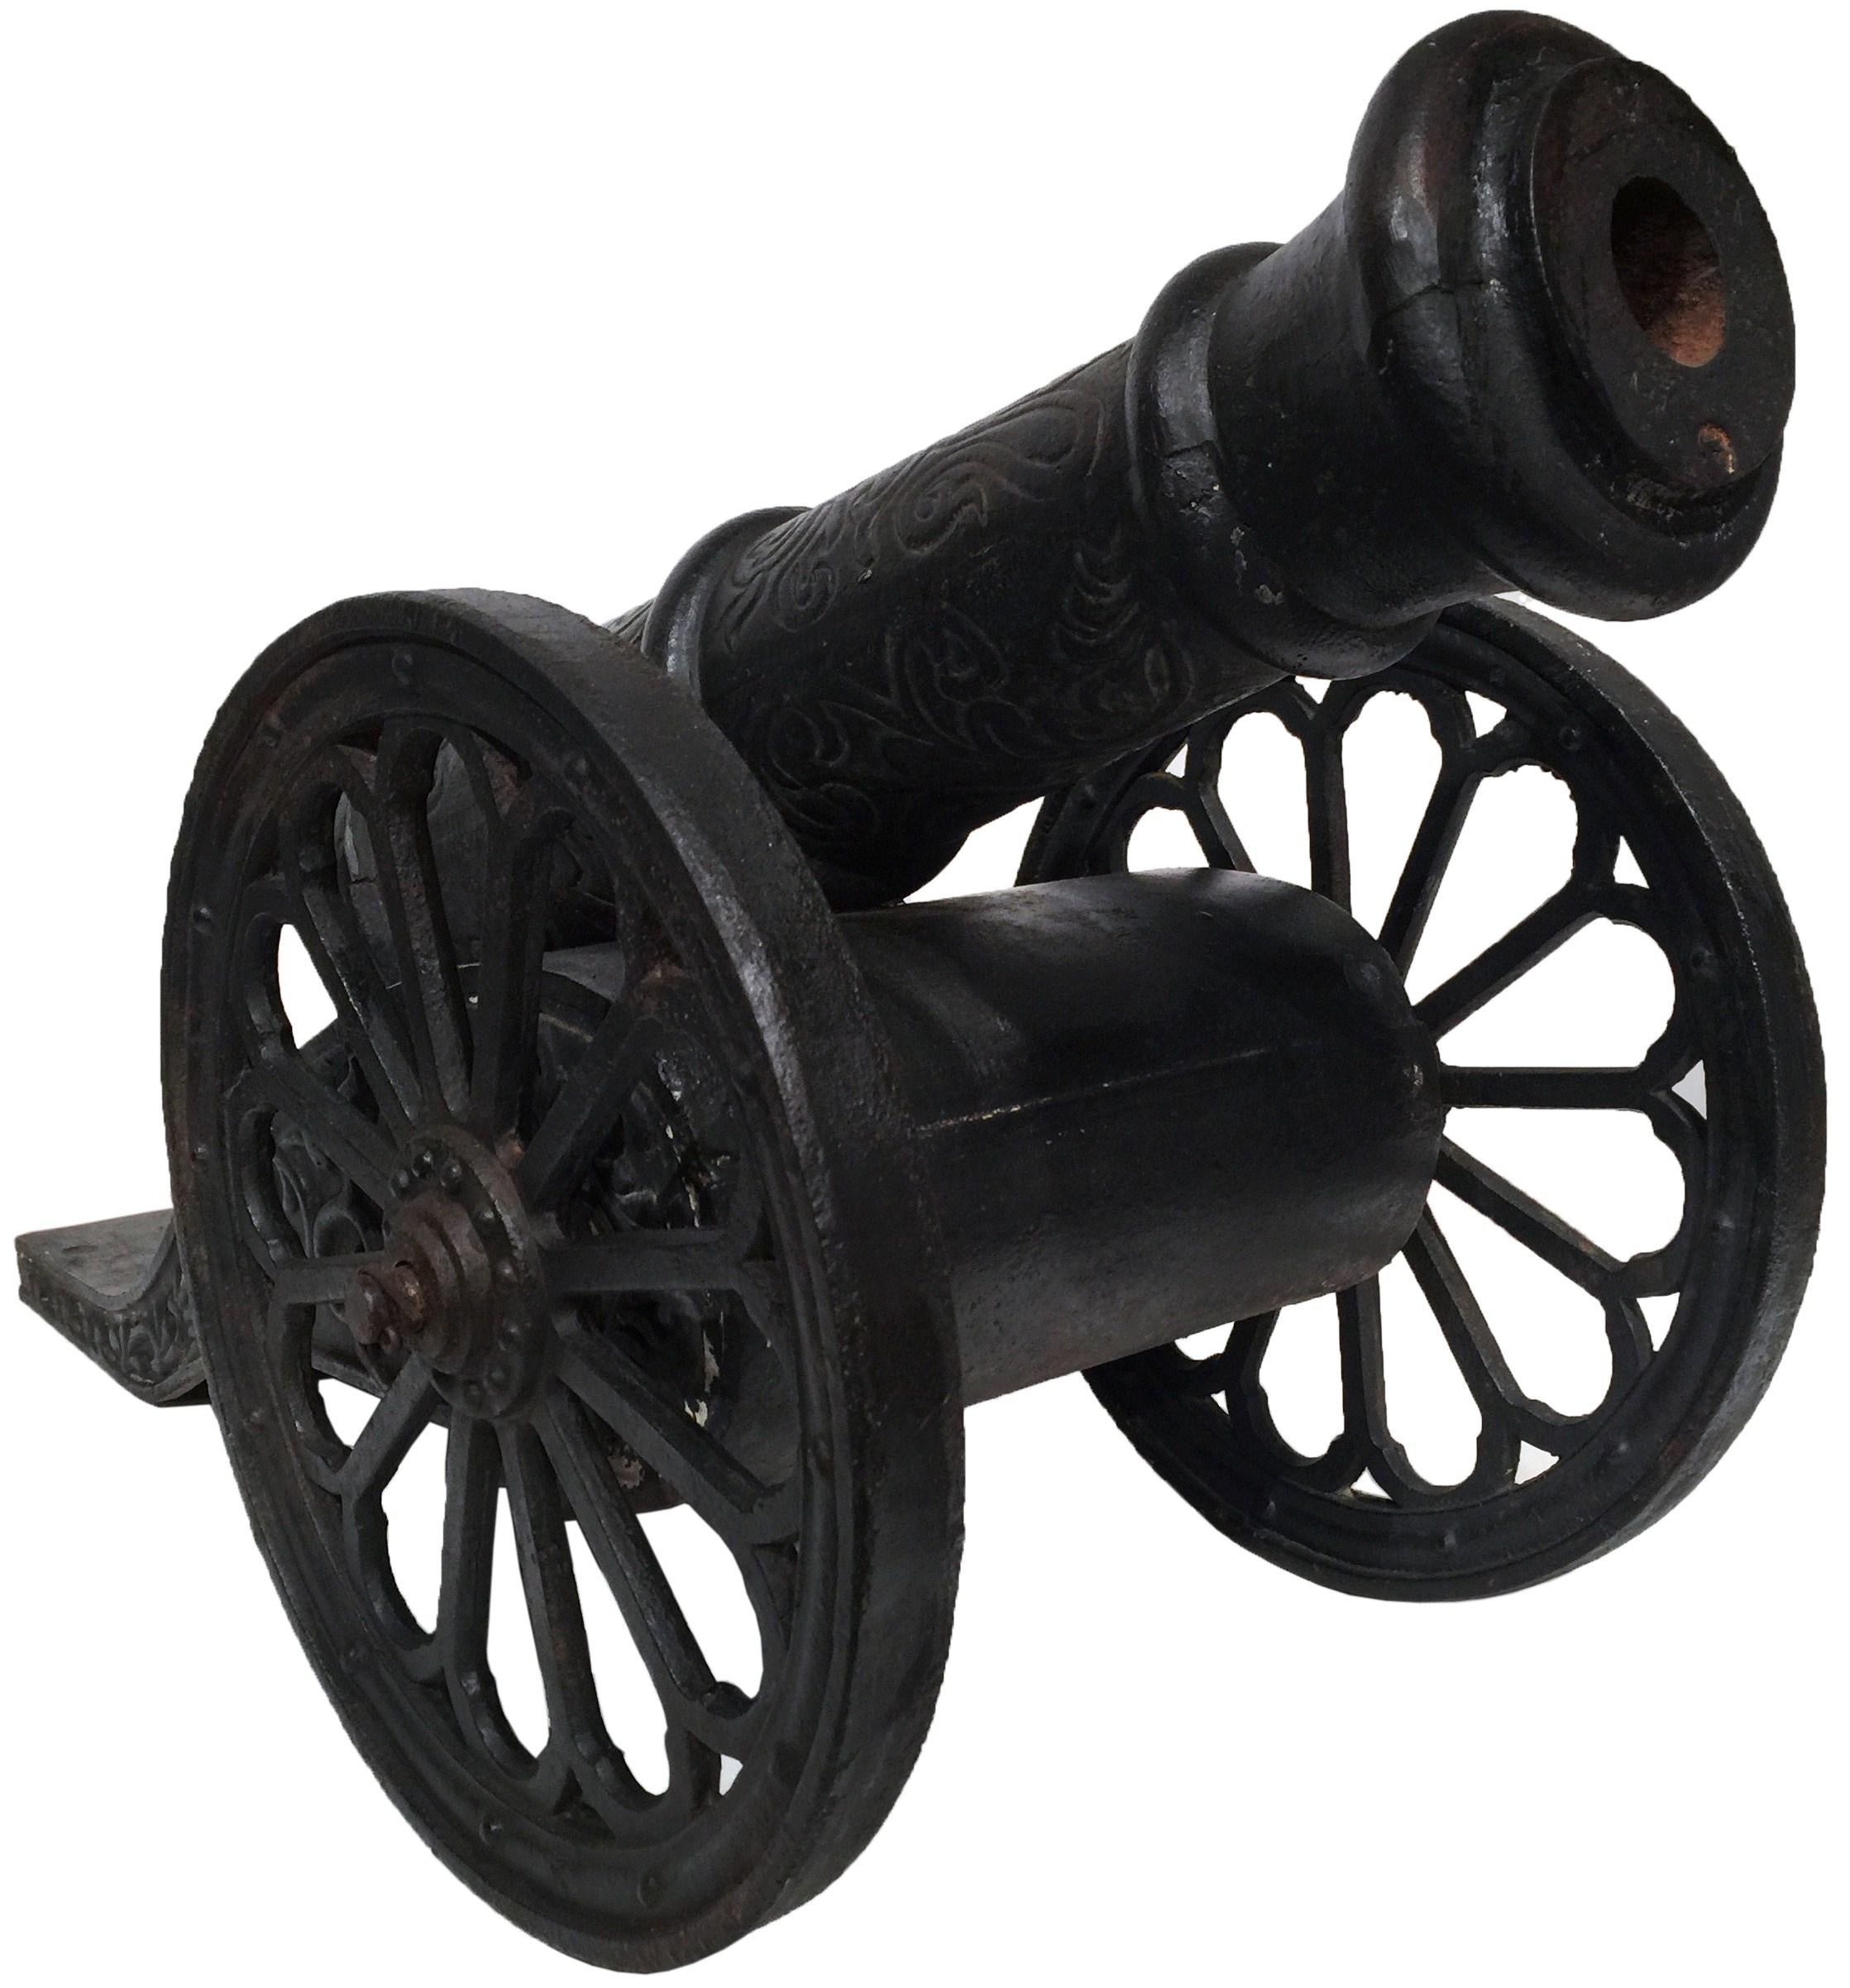 Hand-Crafted Pair of 18th Century French Patinated Decorative Wrought Iron Cannons on Wheels